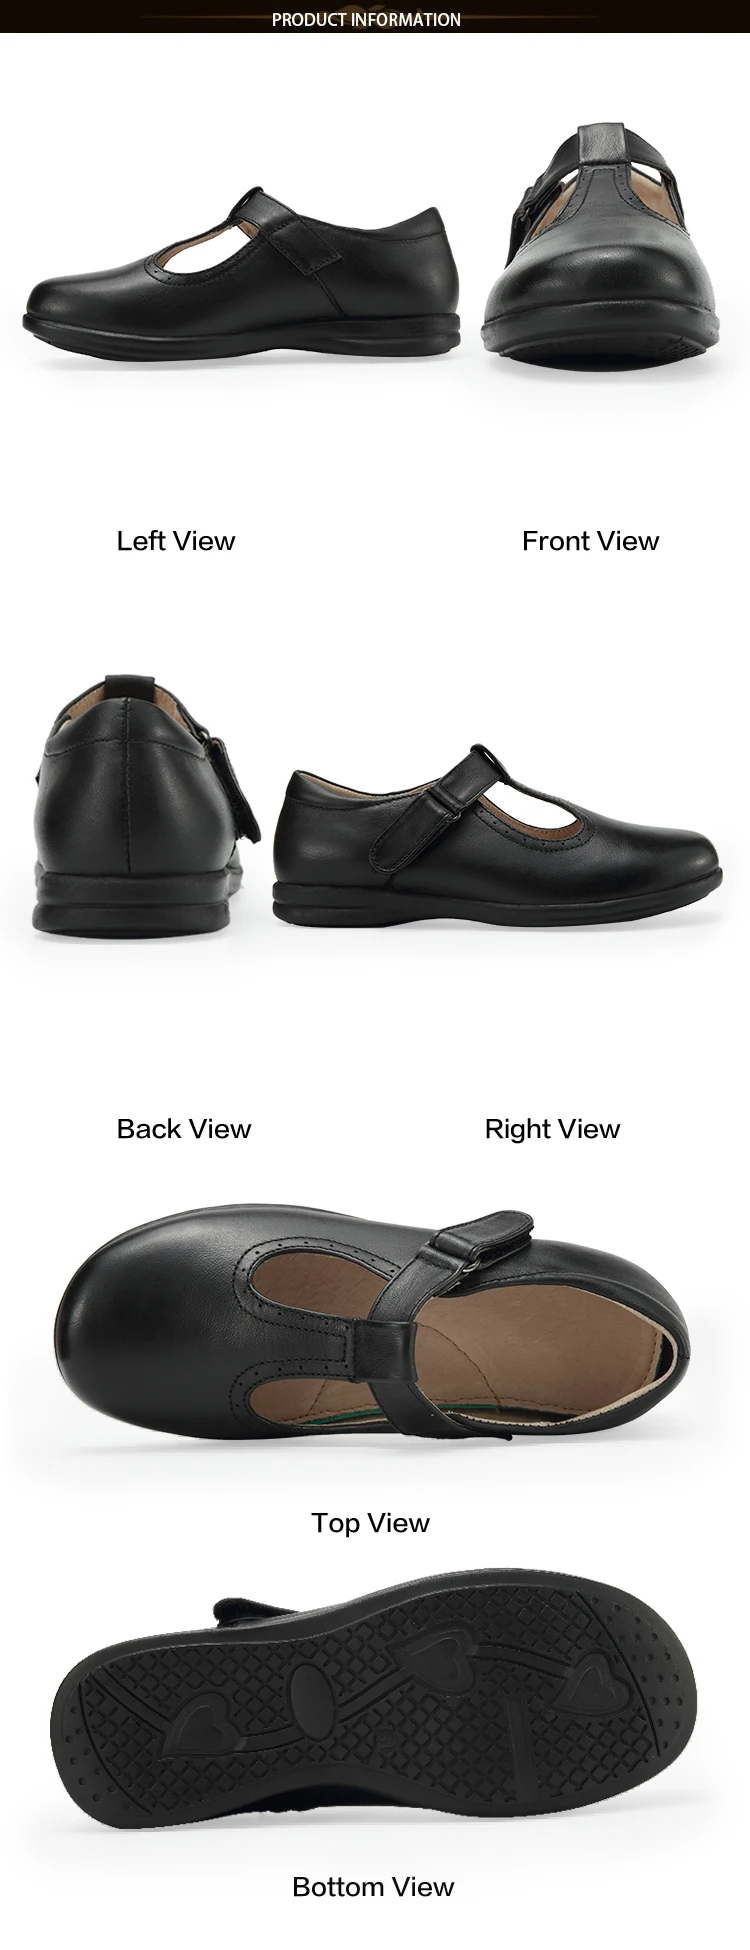 Latest Rubber Black Leather Low Heel 